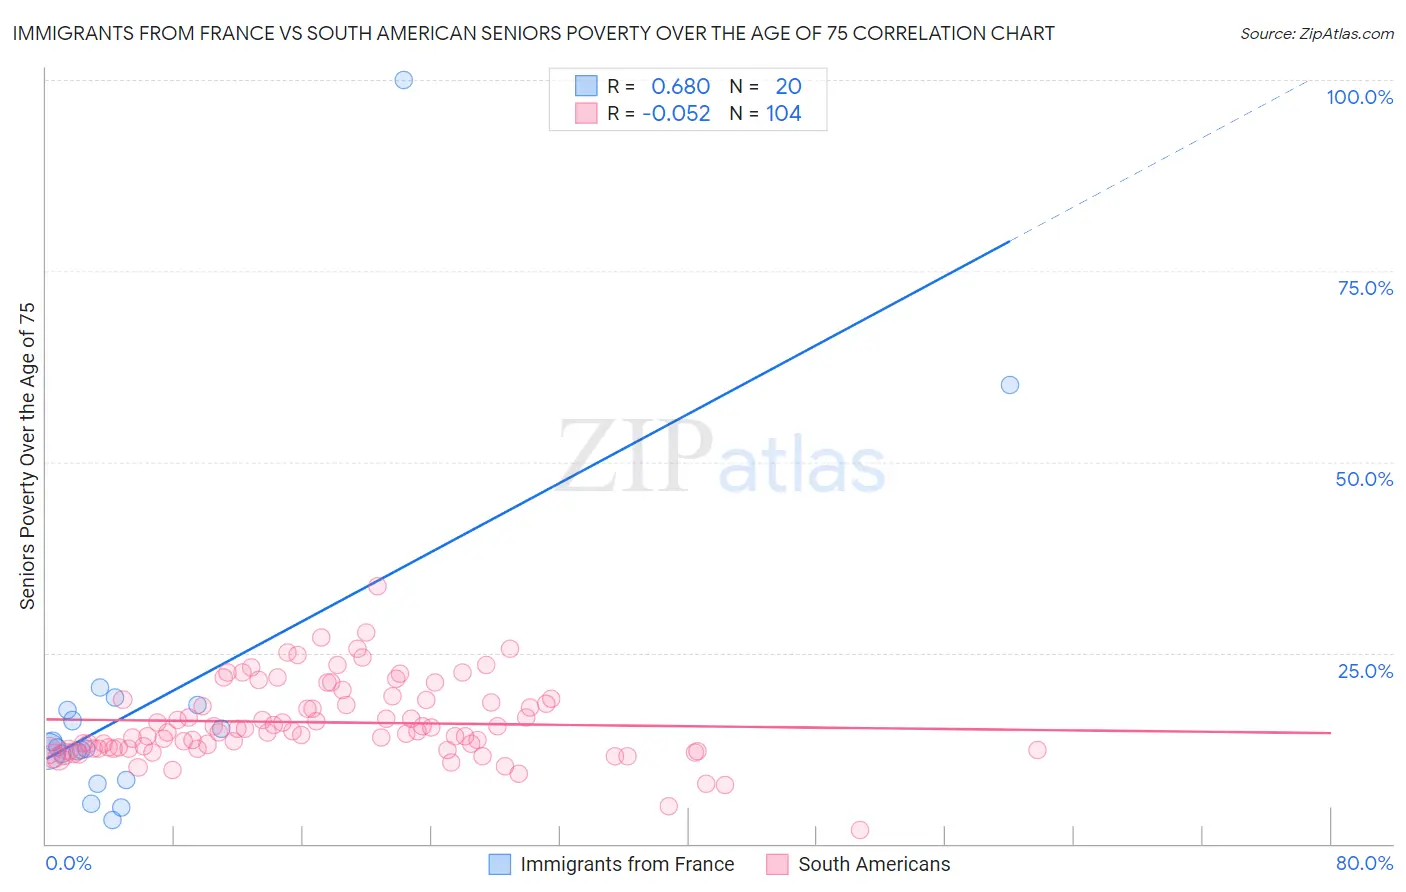 Immigrants from France vs South American Seniors Poverty Over the Age of 75